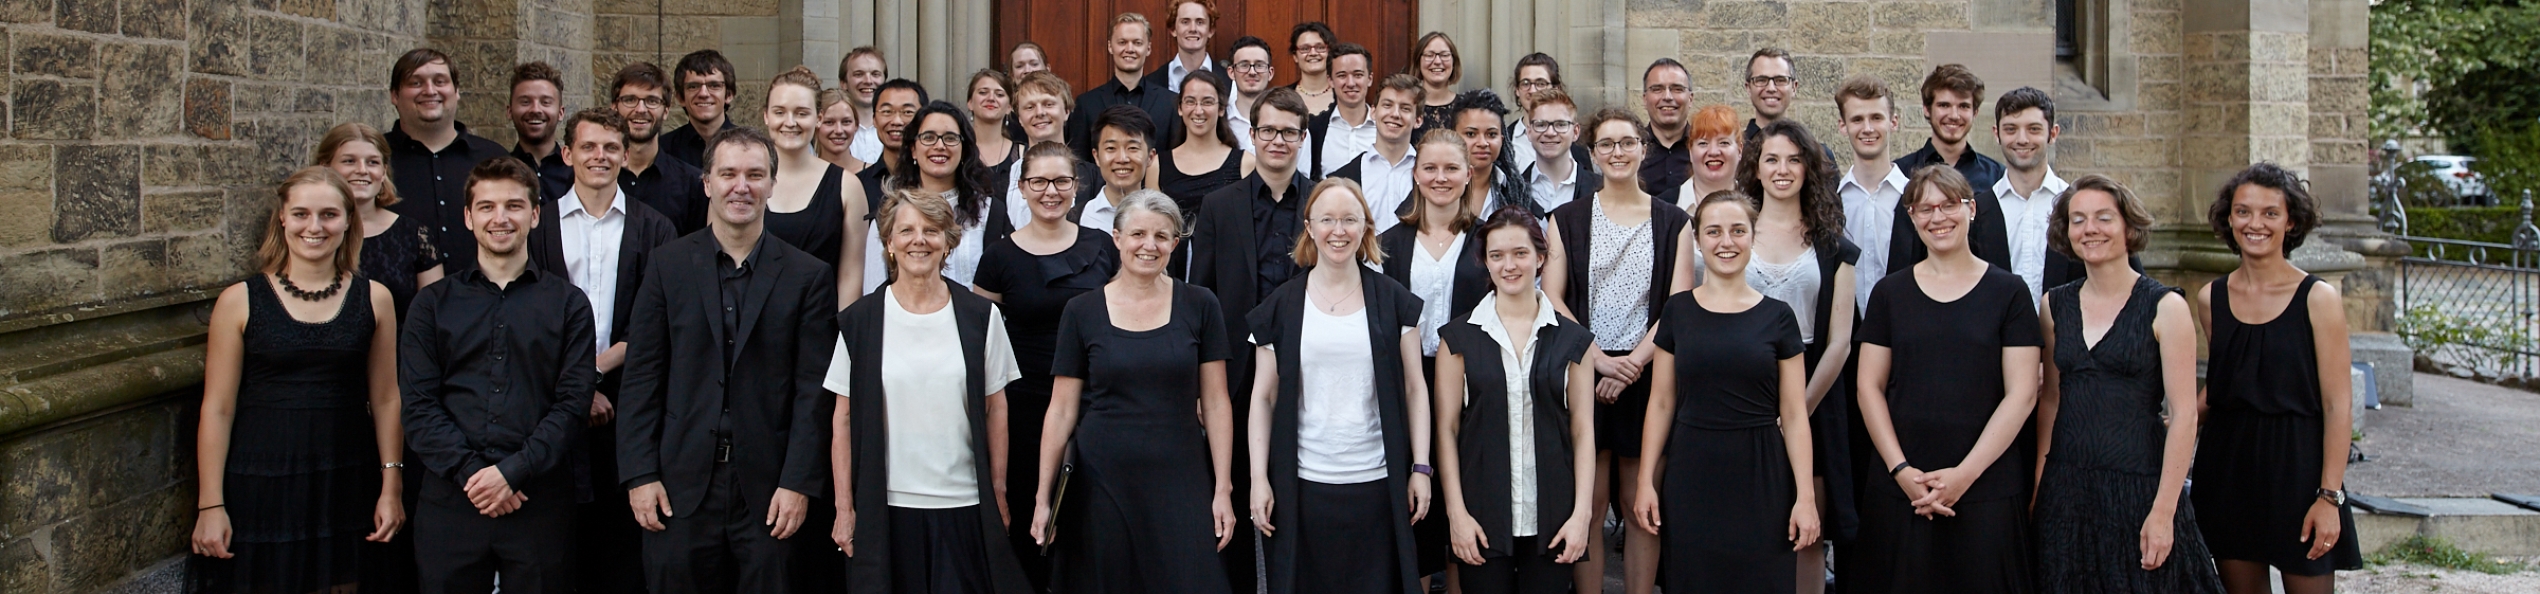 Great is the Lord, mit Wadham Chapel Choir, Oxford, Christuskirche